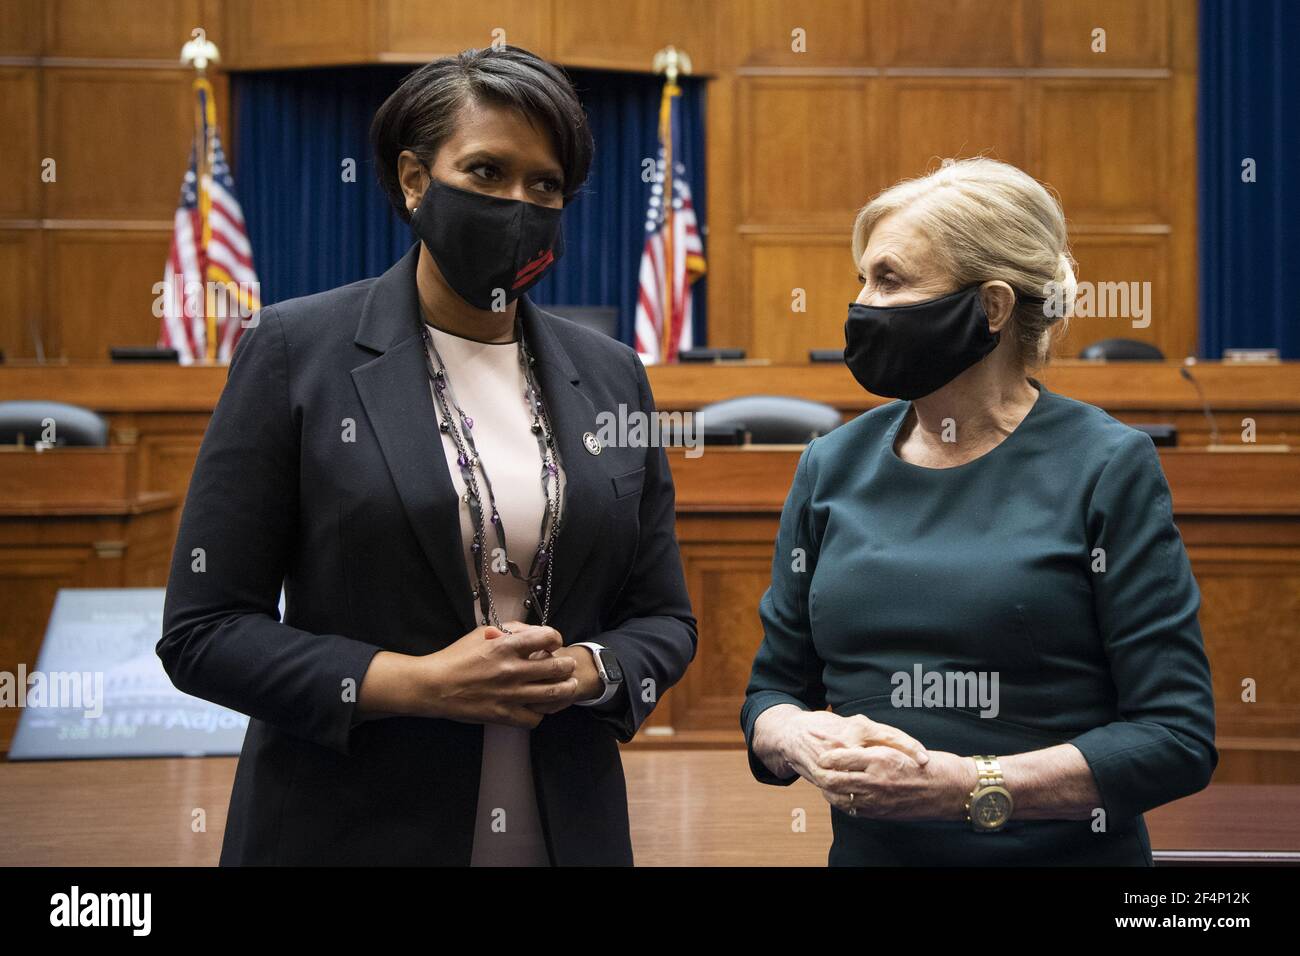 Washington, United States. 22nd Mar, 2021. Washington Mayor Muriel Bowser and Chairwoman Carolyn Maloney, D-N.Y., talk at the end of the House Oversight and Reform Committee hearing on the District of Columbia statehood bill, on Capitol Hill in Washington on Monday, March 22, 2021. Pool Photo by Caroline Brehman/UPI Credit: UPI/Alamy Live News Stock Photo